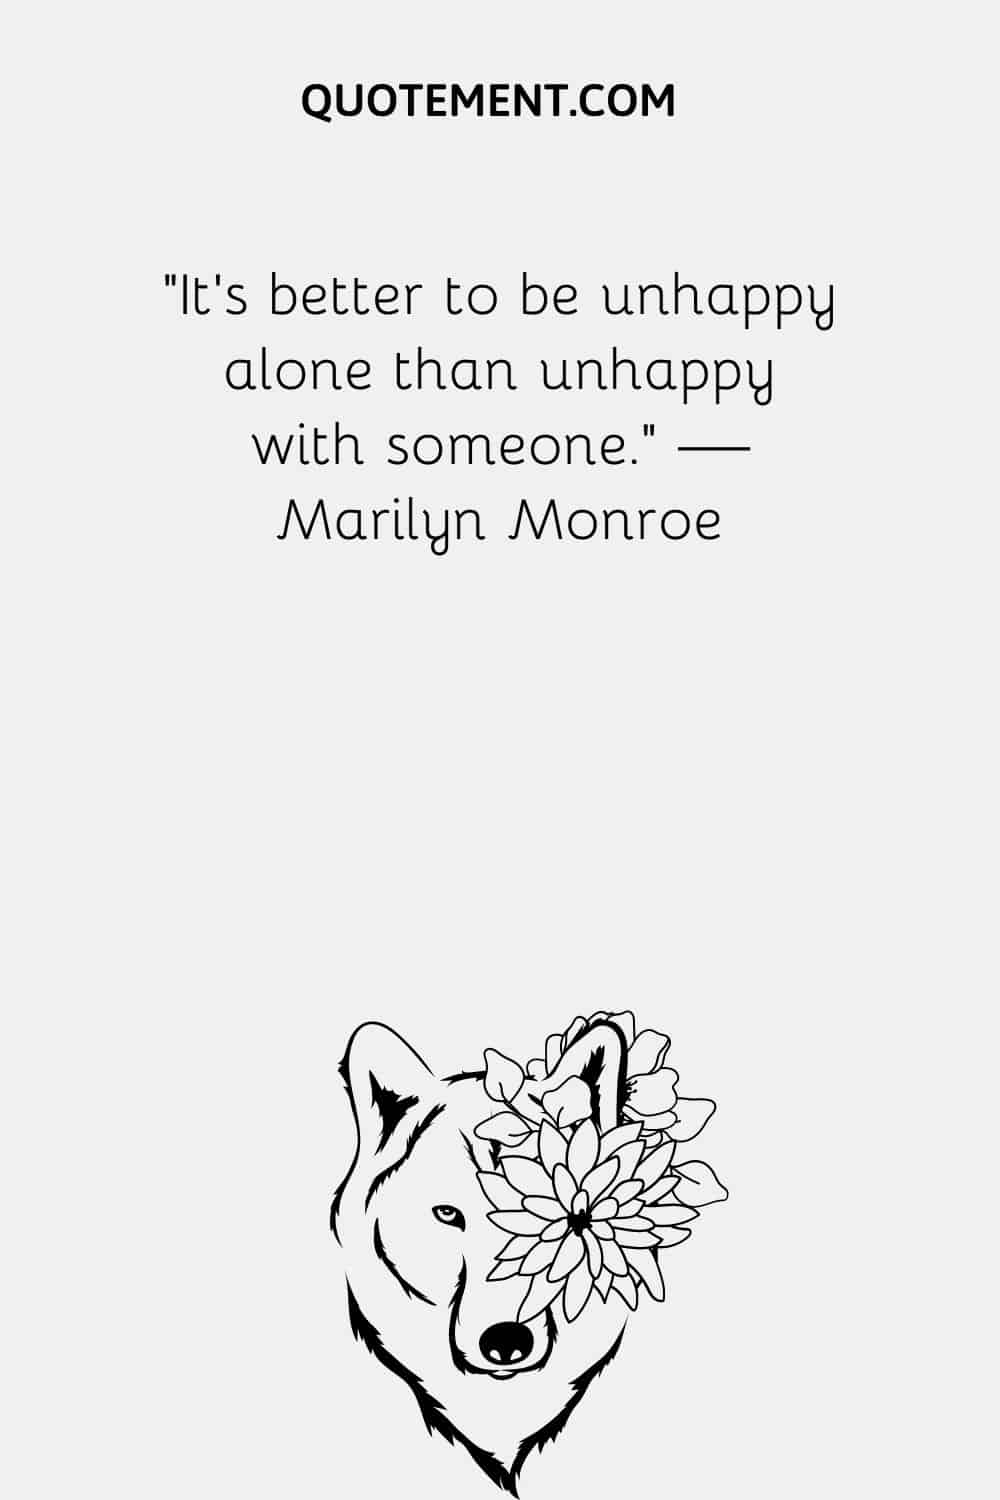 It's better to be unhappy alone than unhappy with someone